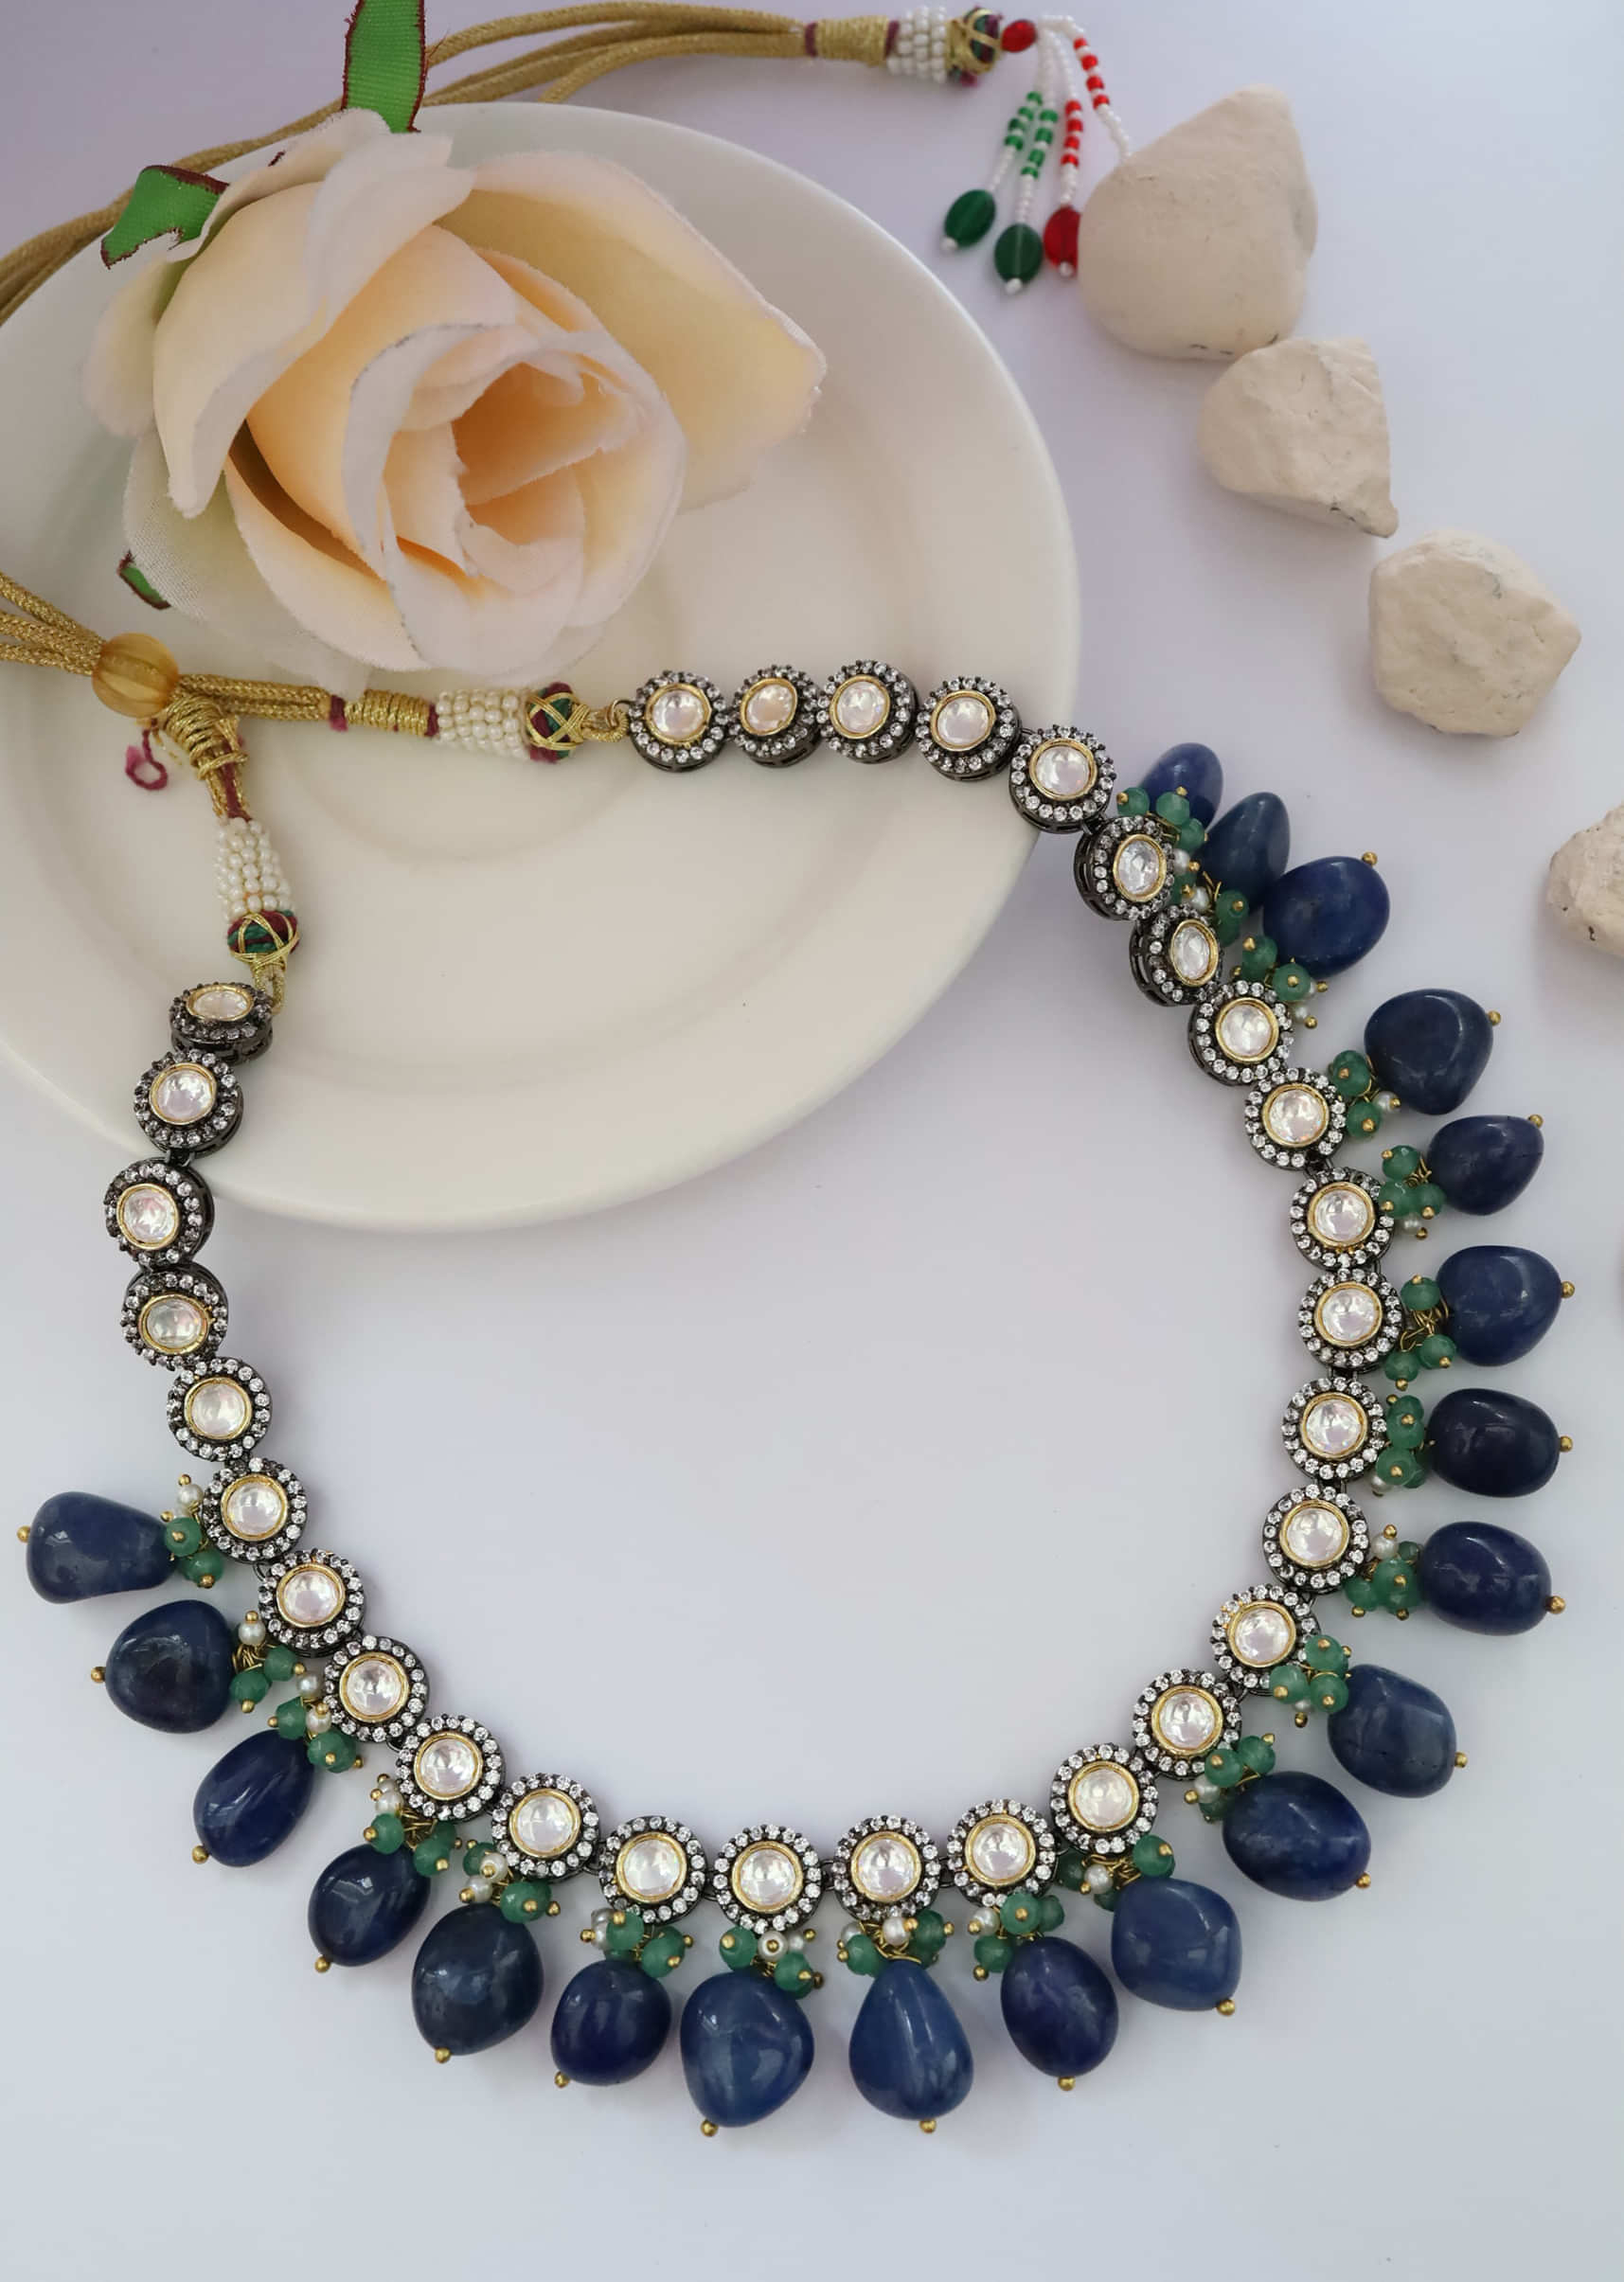 Victorian Inspired Necklace With Cubic Zirconia Lined Polki, Blue And Green Stones By Paisley Pop